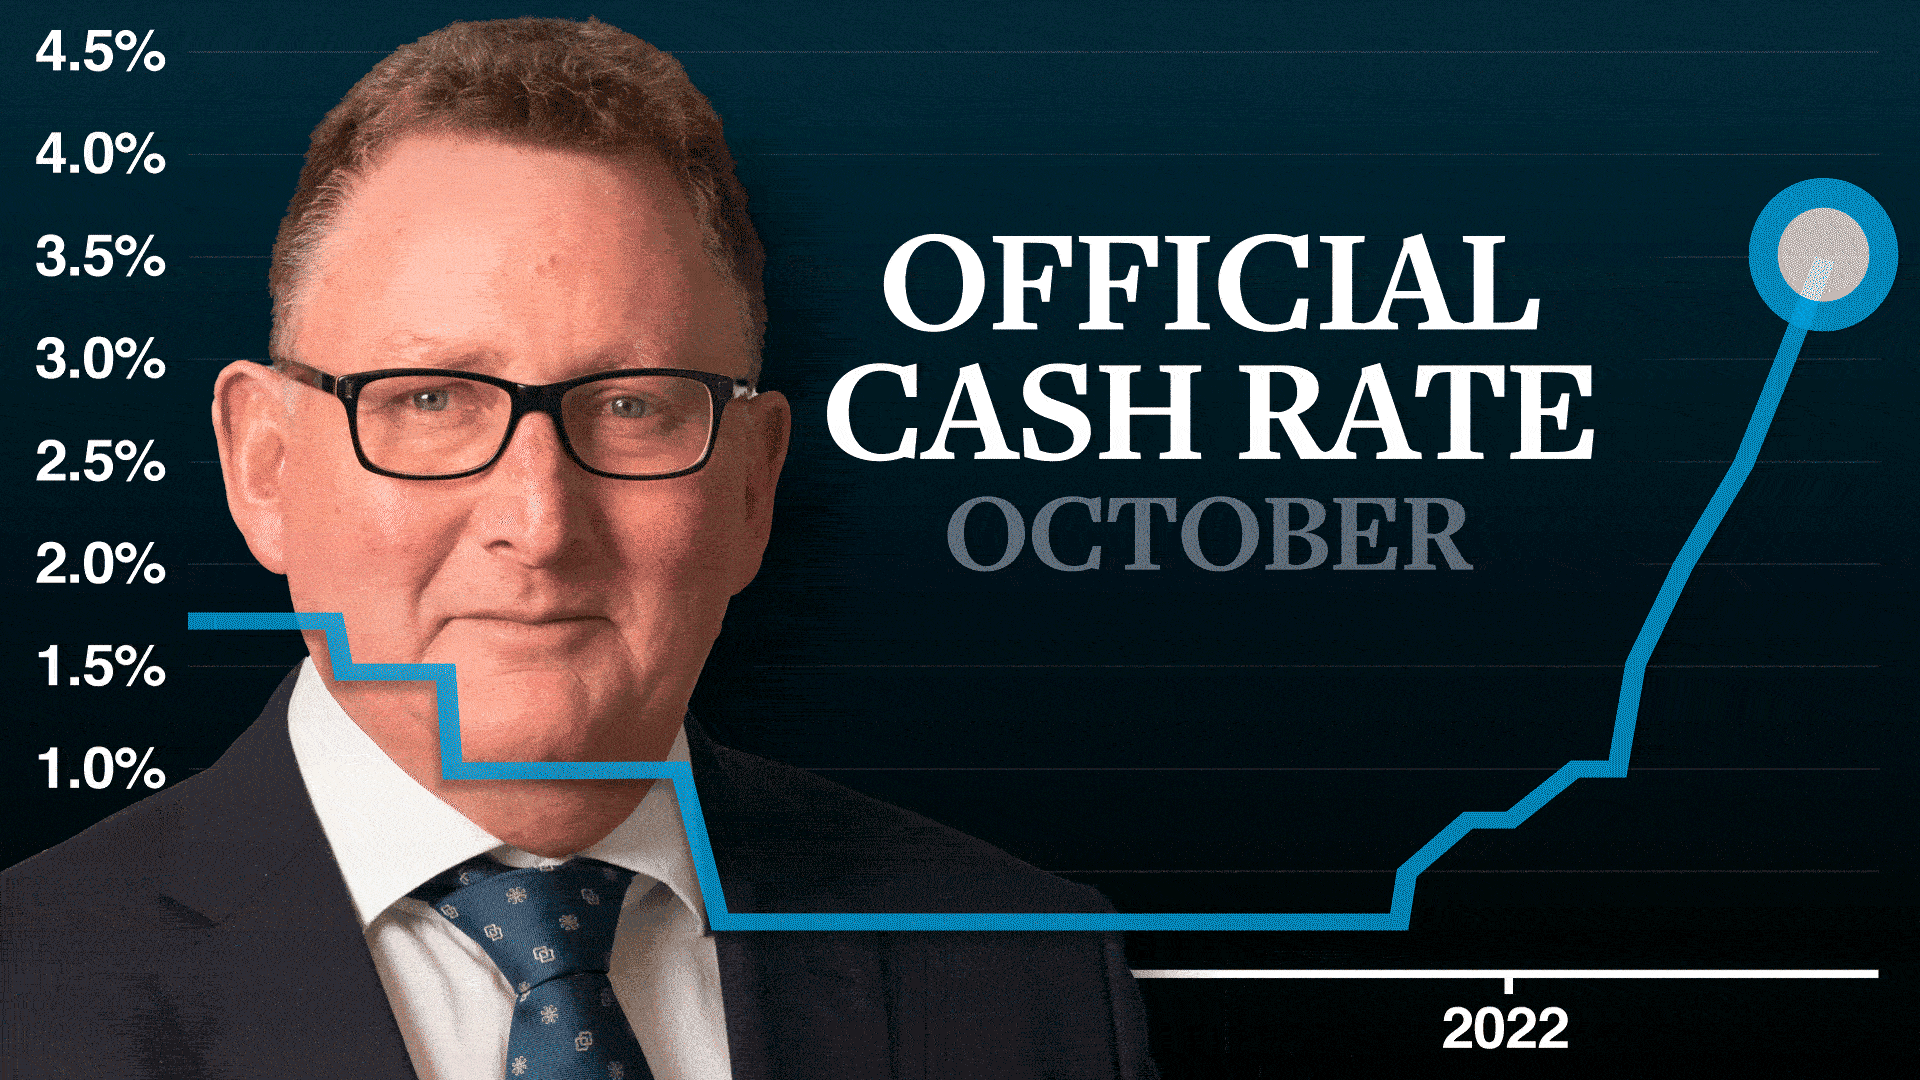 RBNZ delivers fifth 50bp hike to OCR